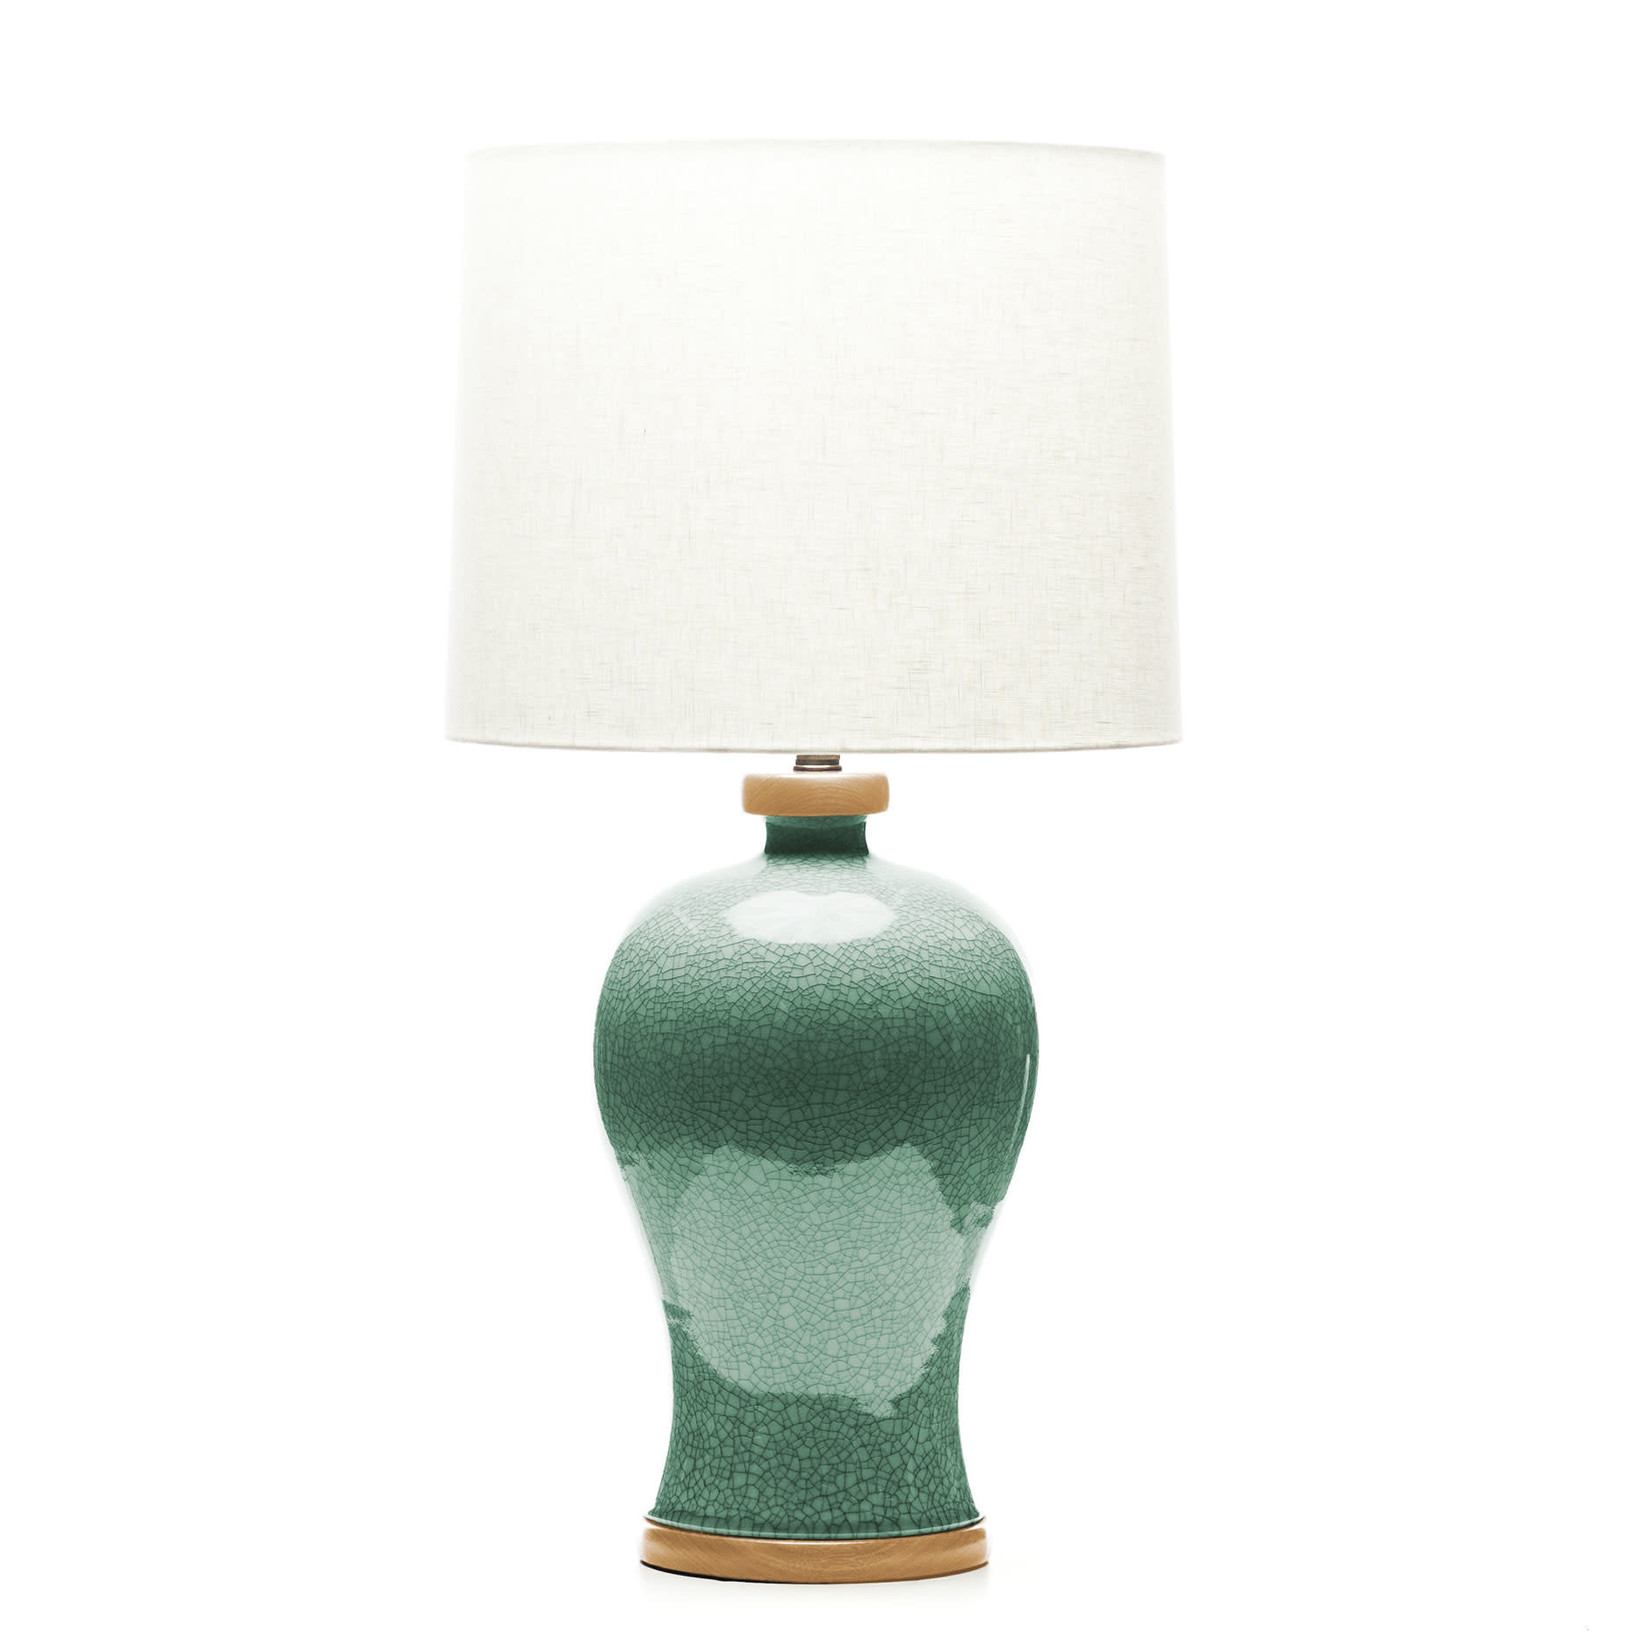 Lawrence & Scott Dashiell Table Lamp in Aquamarine Crackle with Oak Base